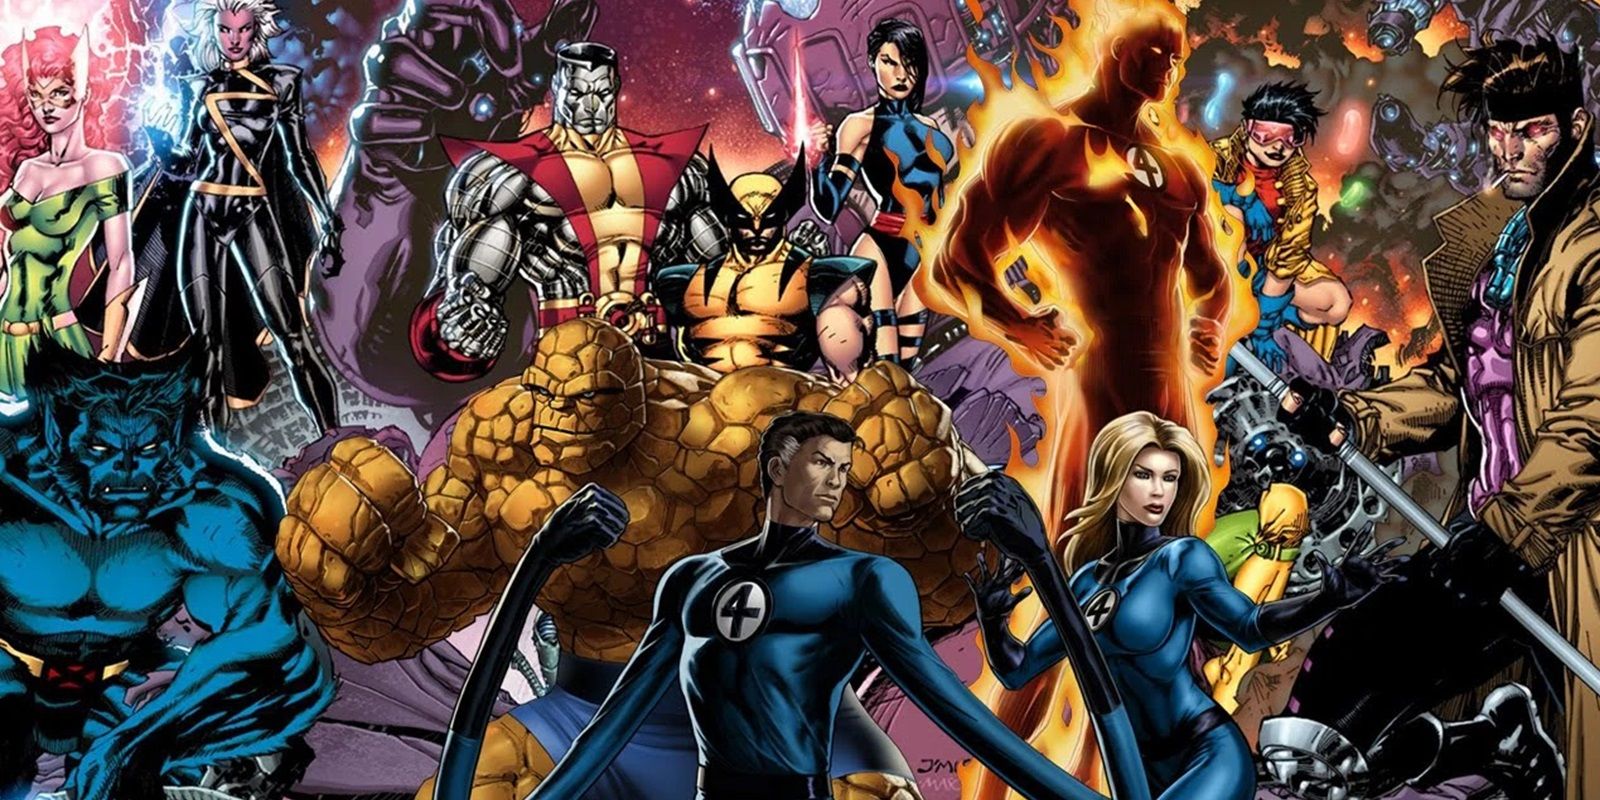 Feature image: vast collage featuring the Fantastic Four surrounded by members of the X-Men